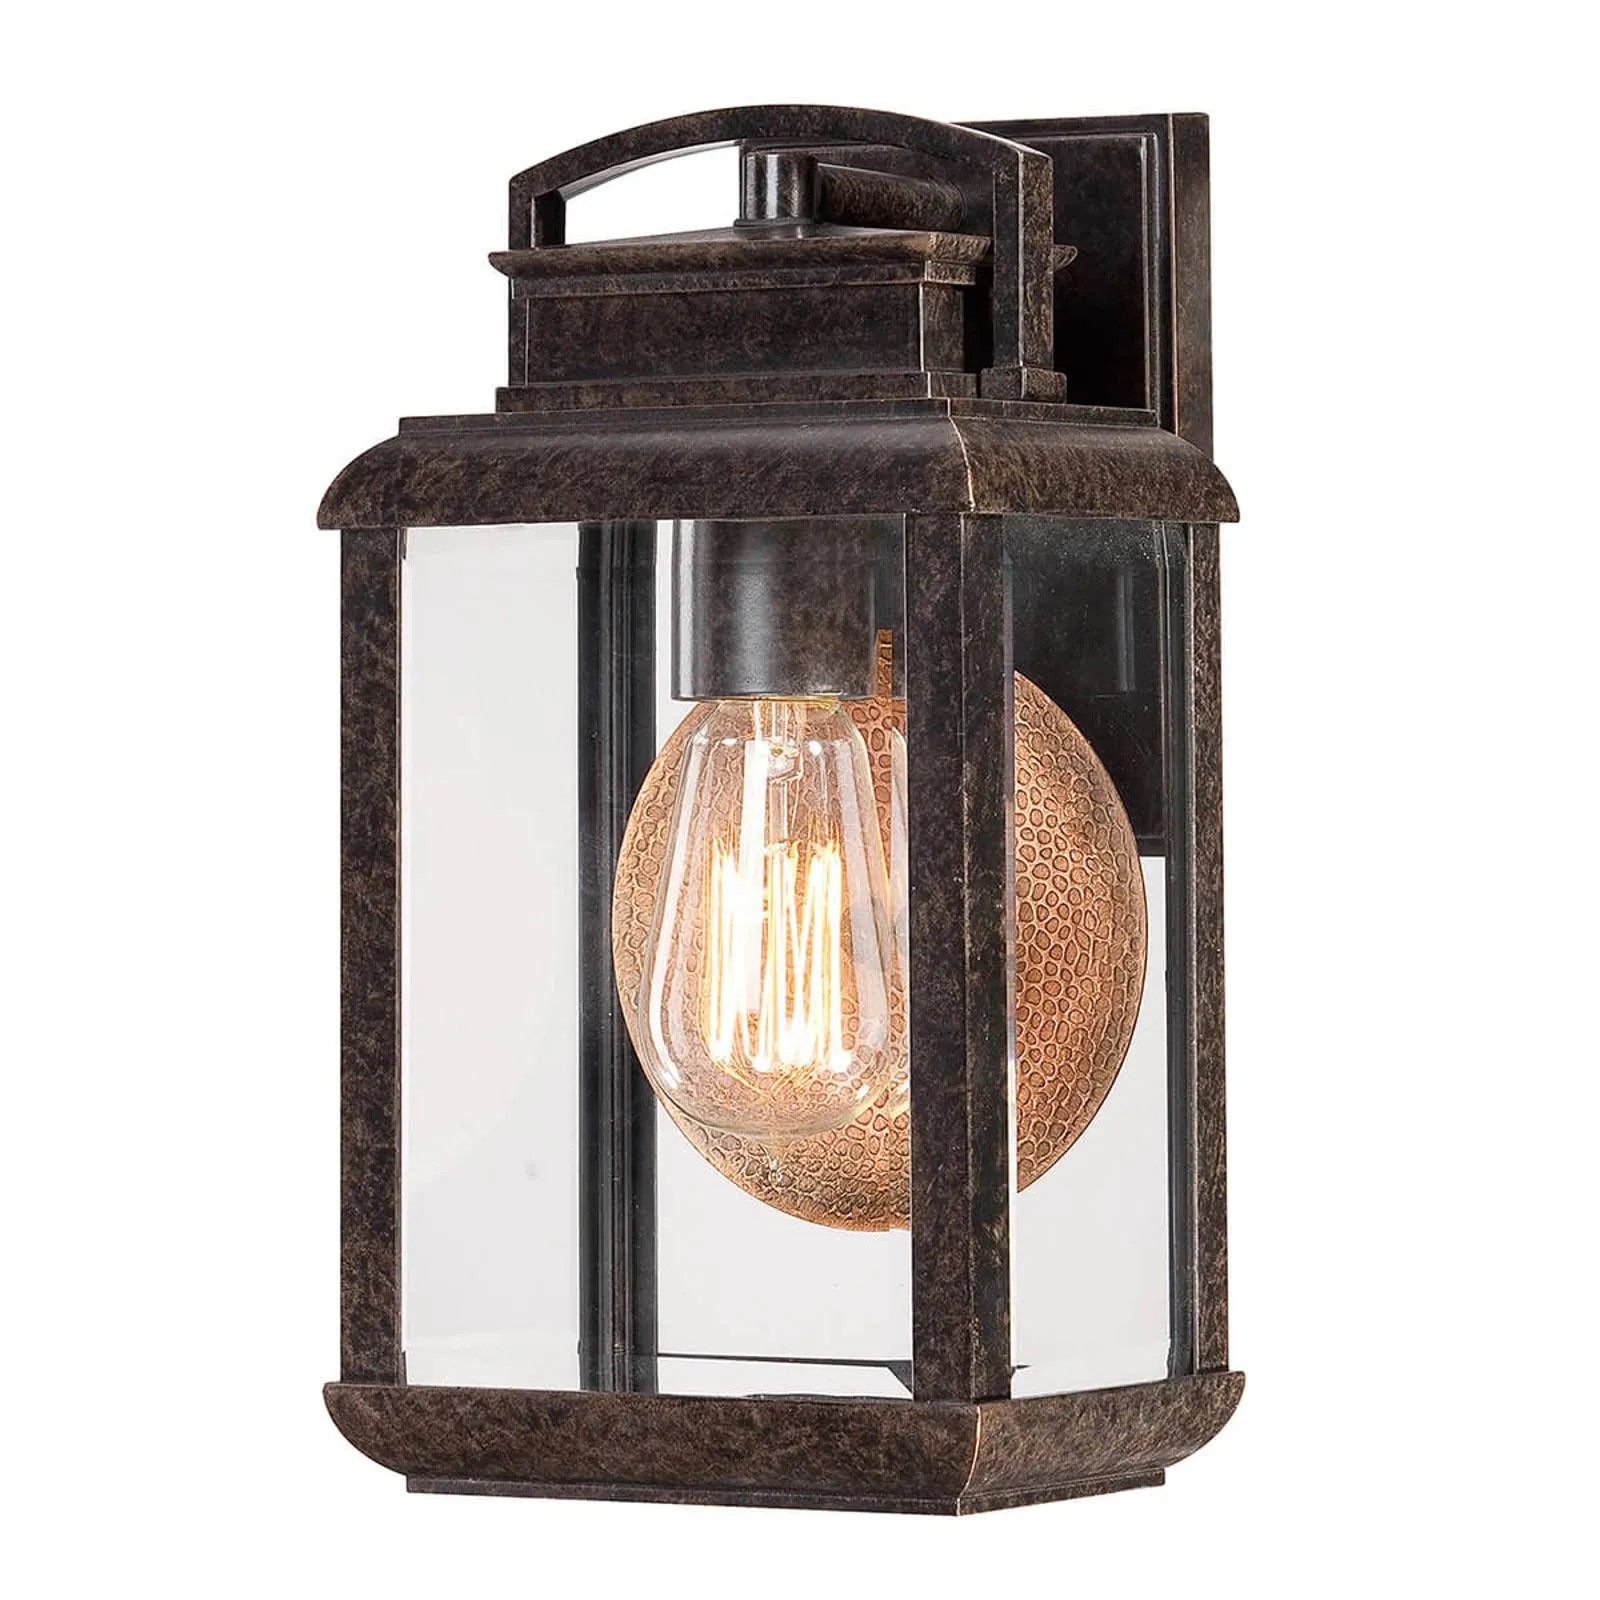 With a vintage look - Lyndon outdoor wall light